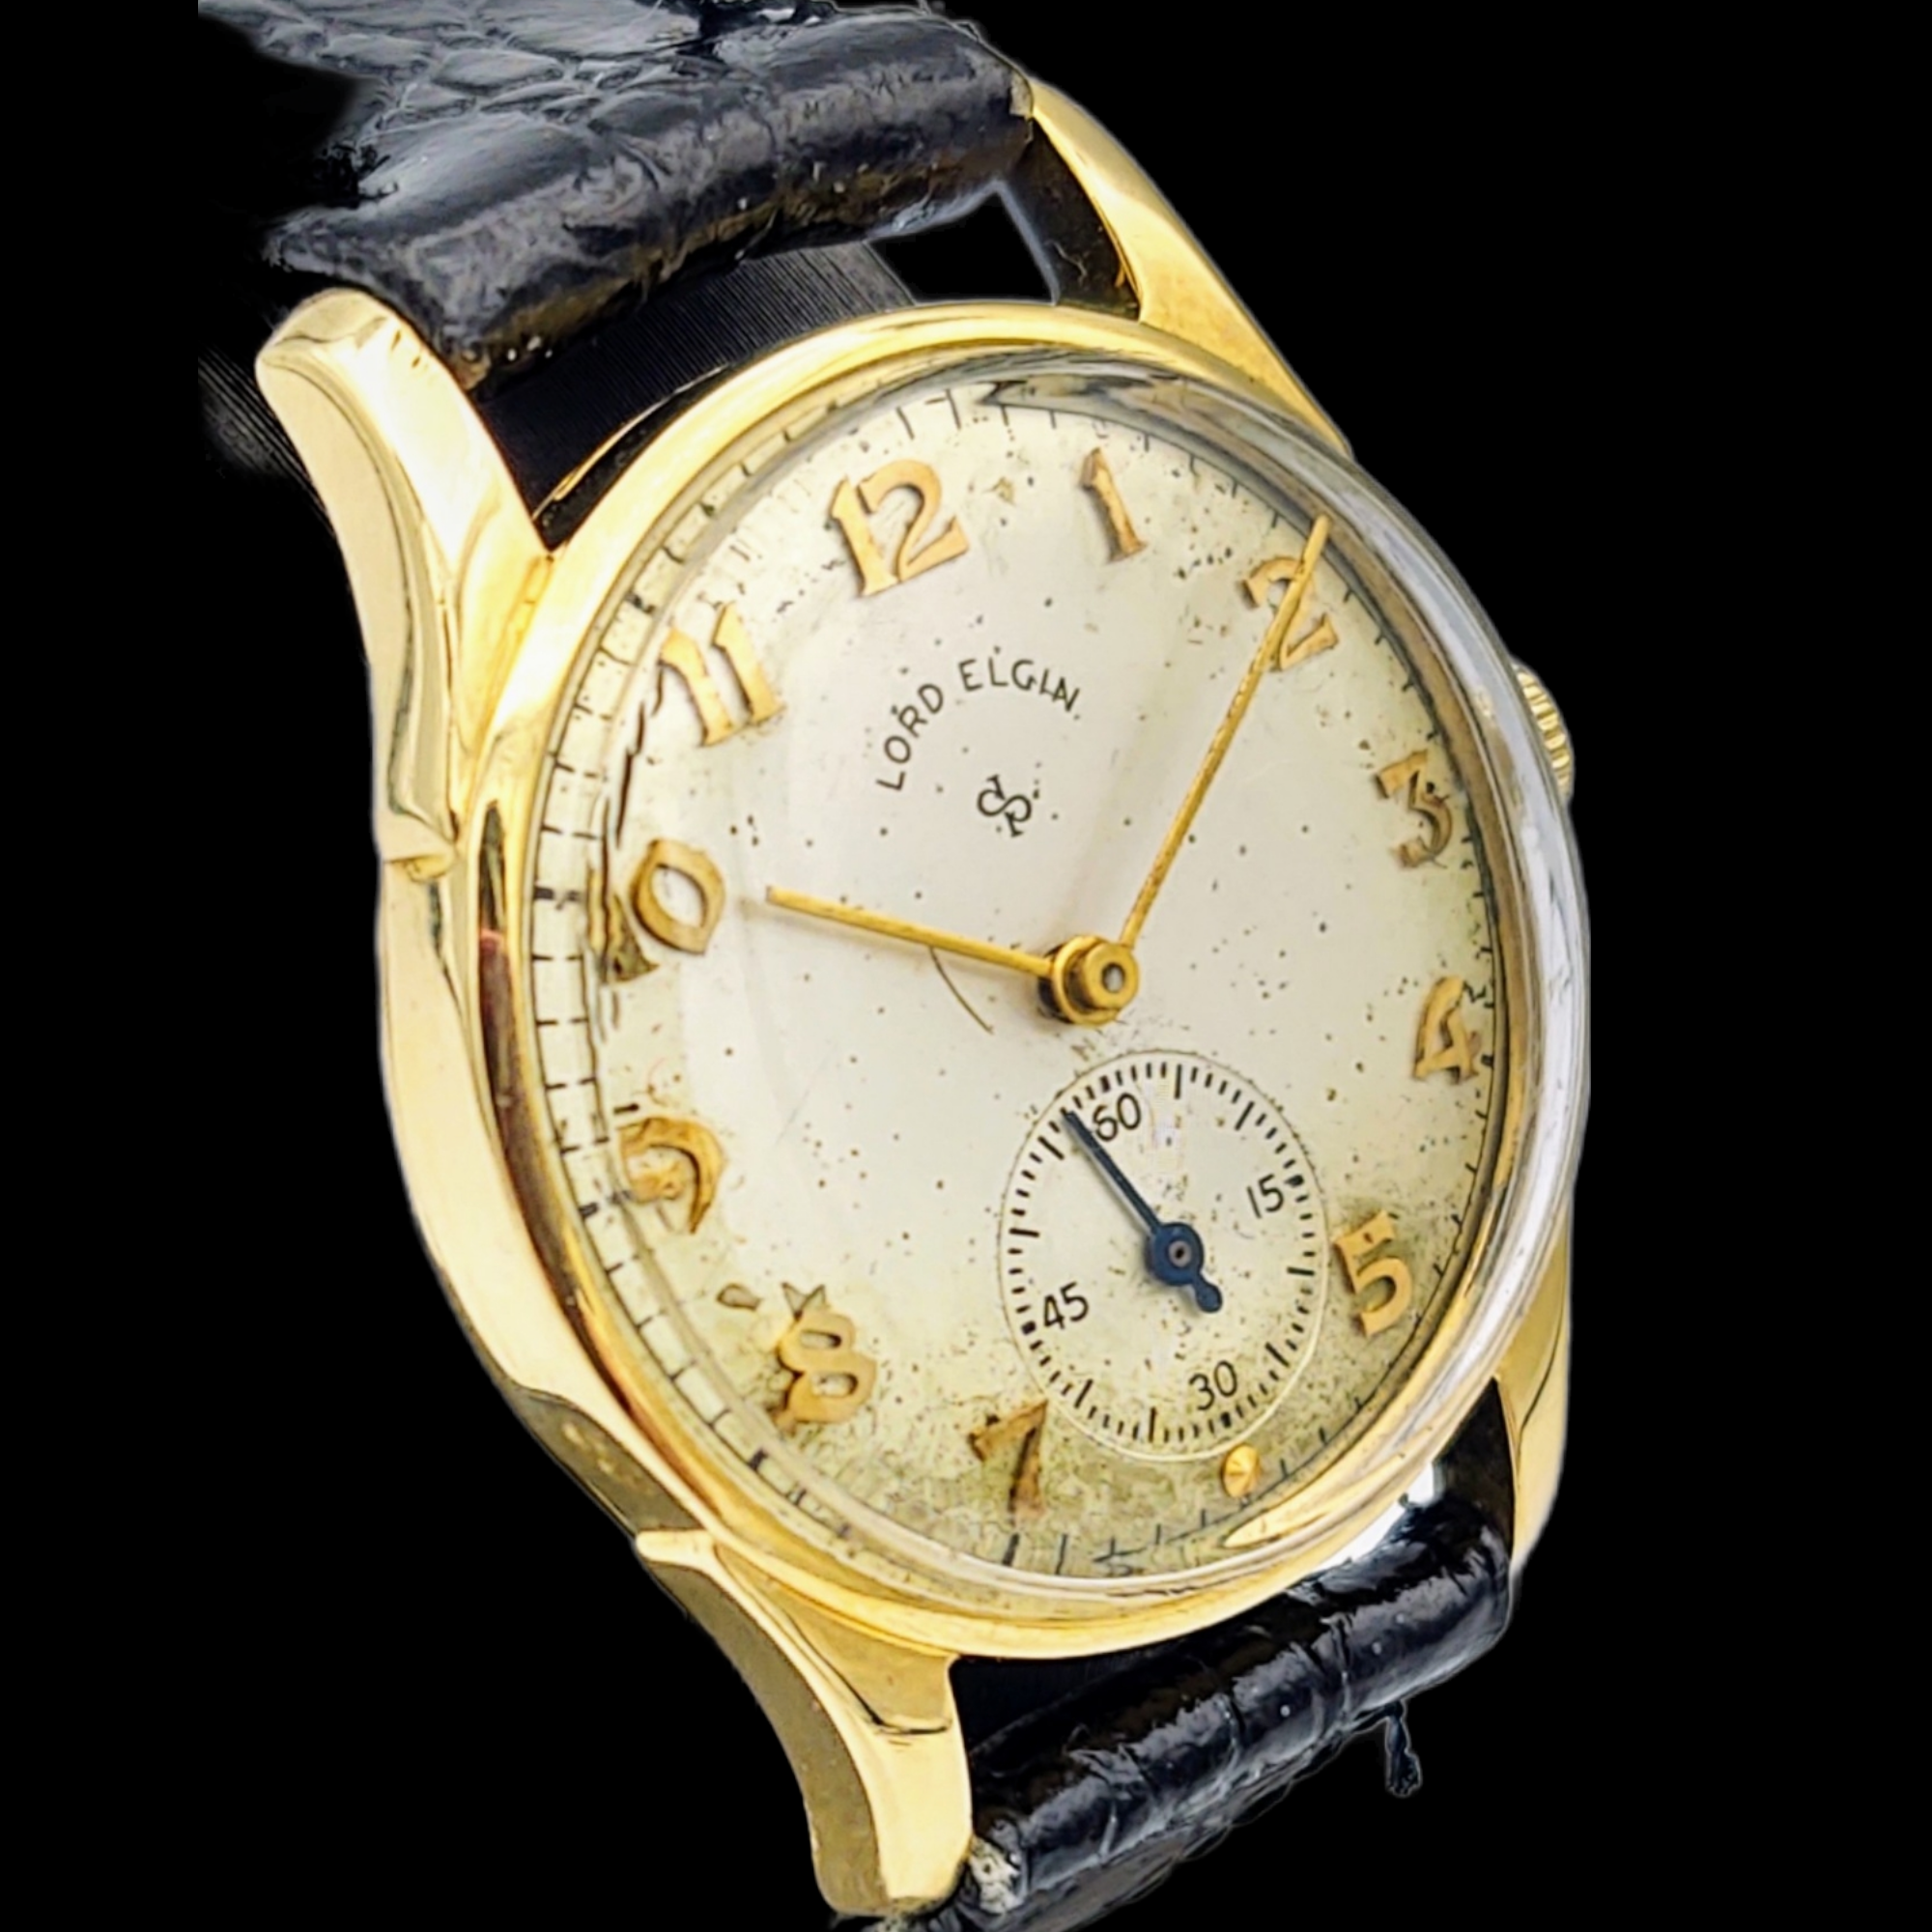 LORD ELGIN 14K Solid Gold Watch Grade 555 U.S.A. Made